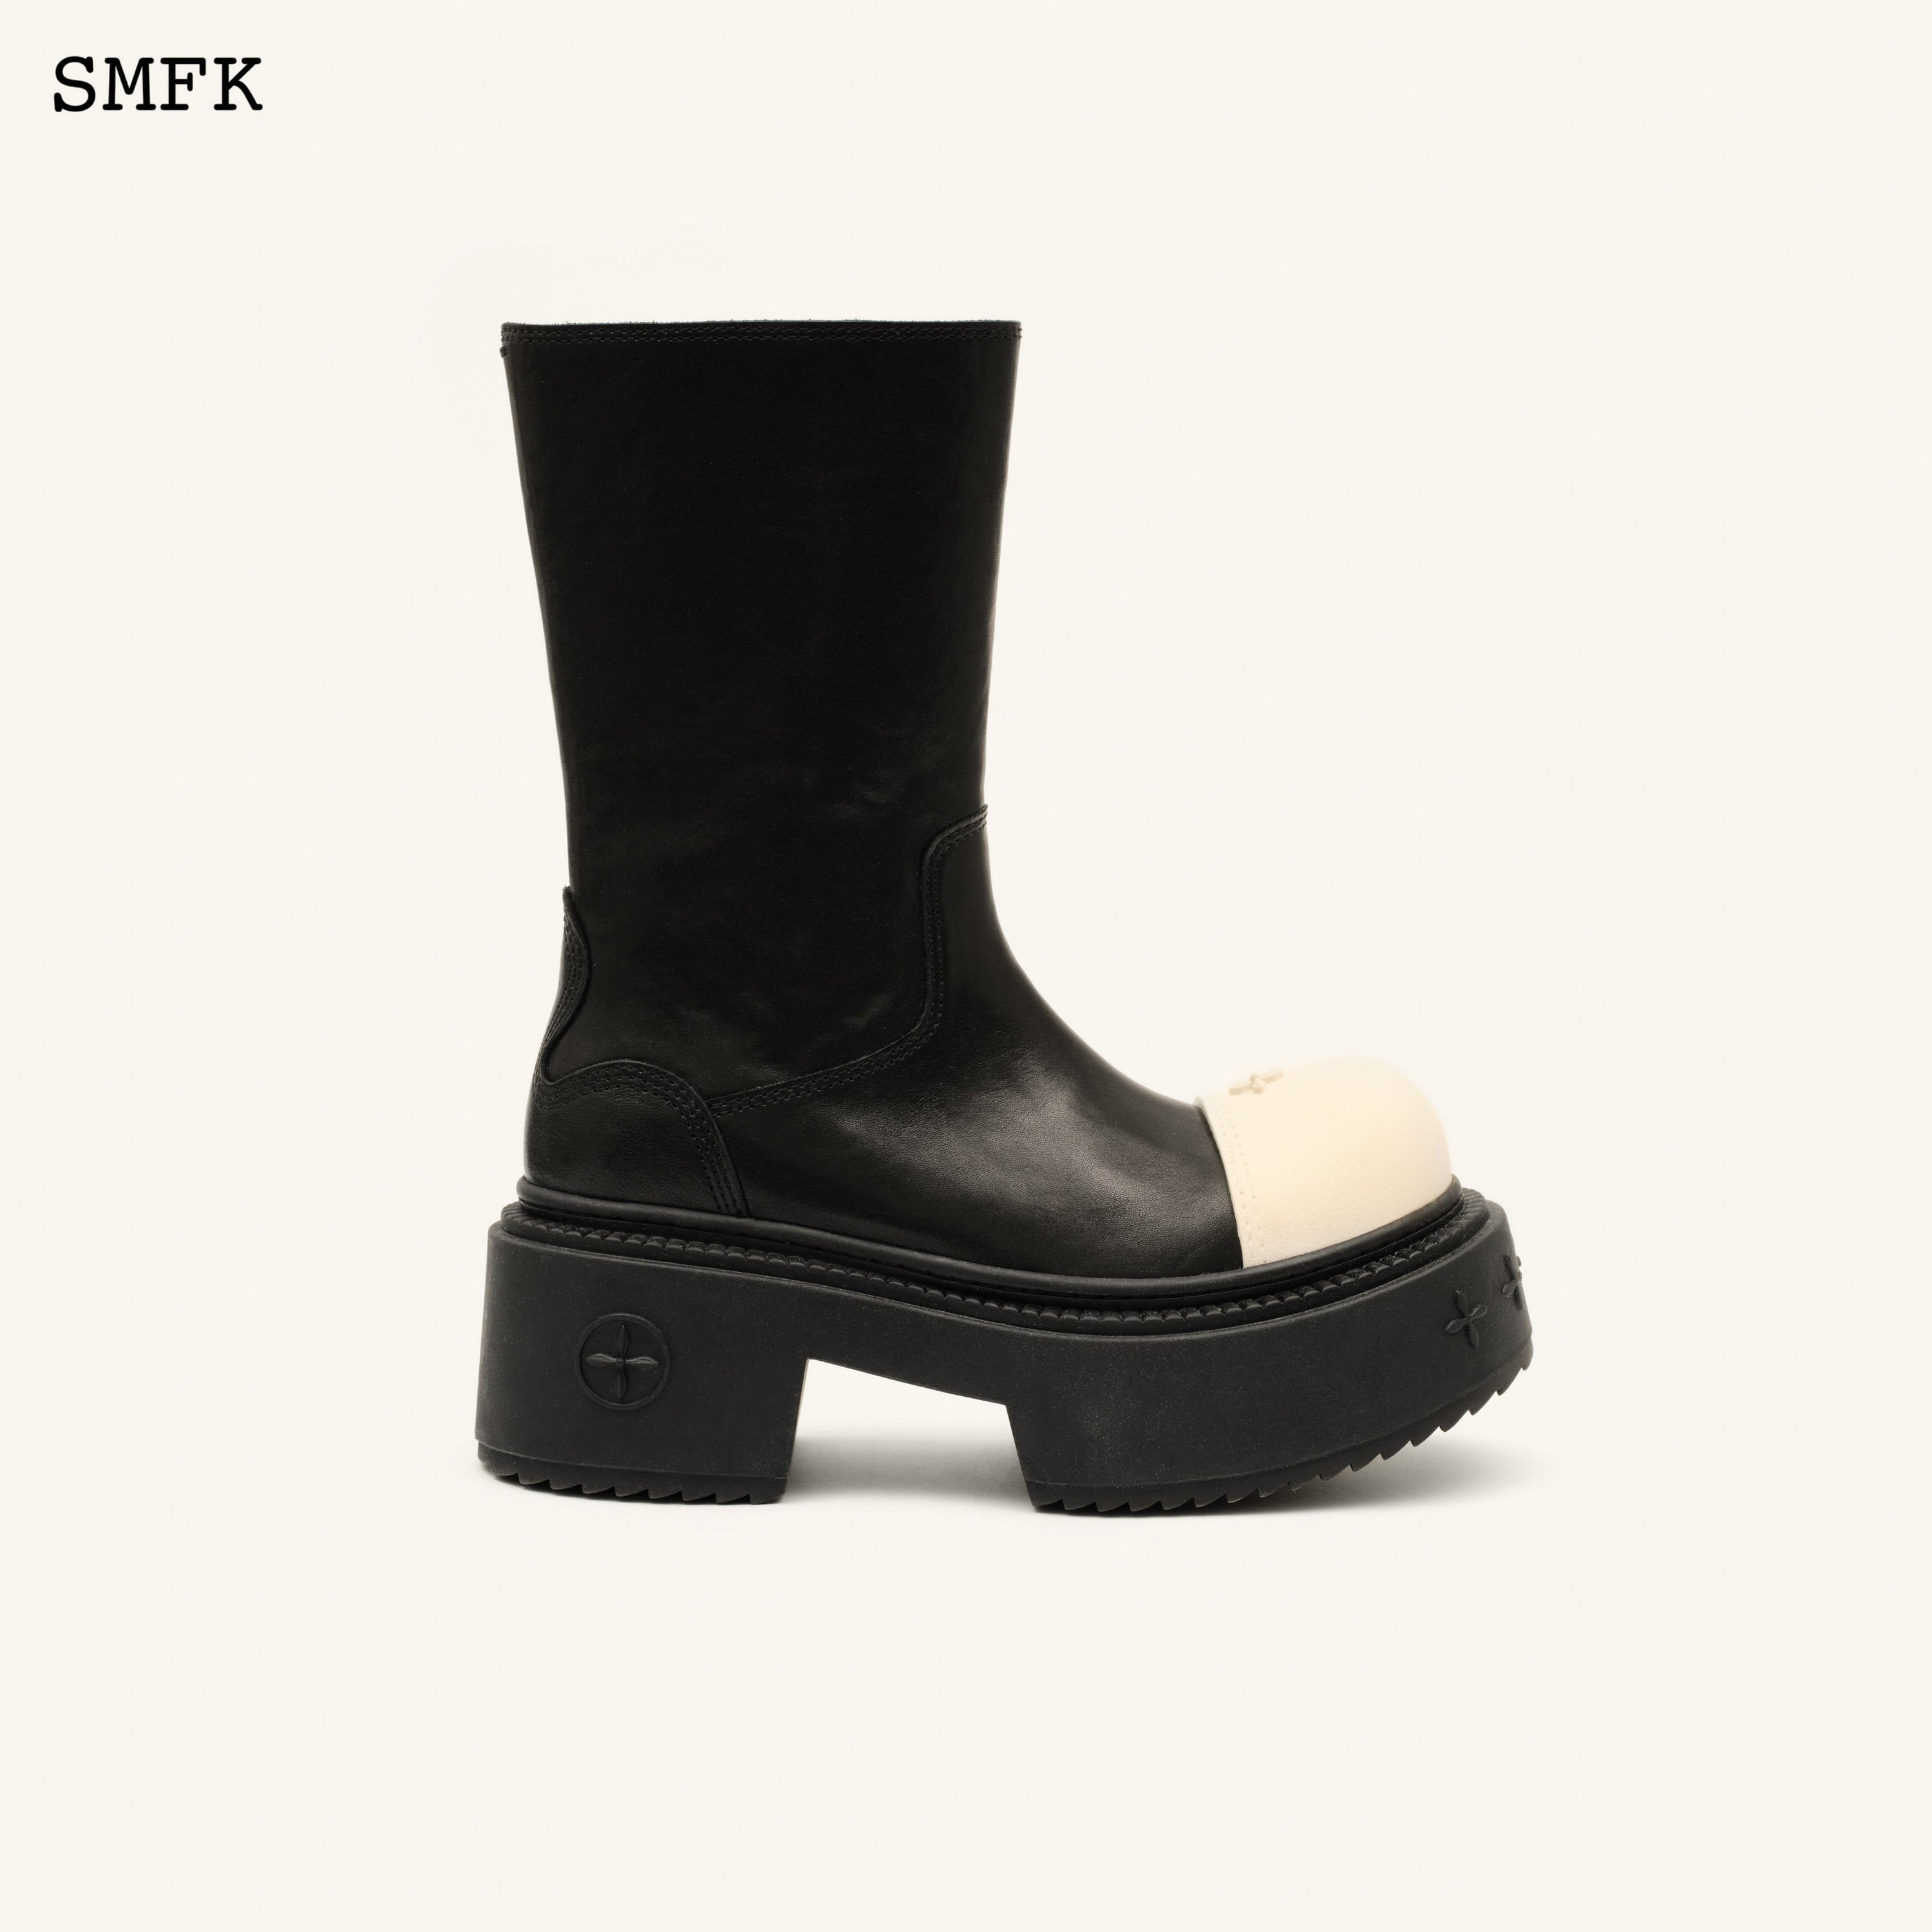 Compass Rider Low Boots In Black And White - SMFK Official